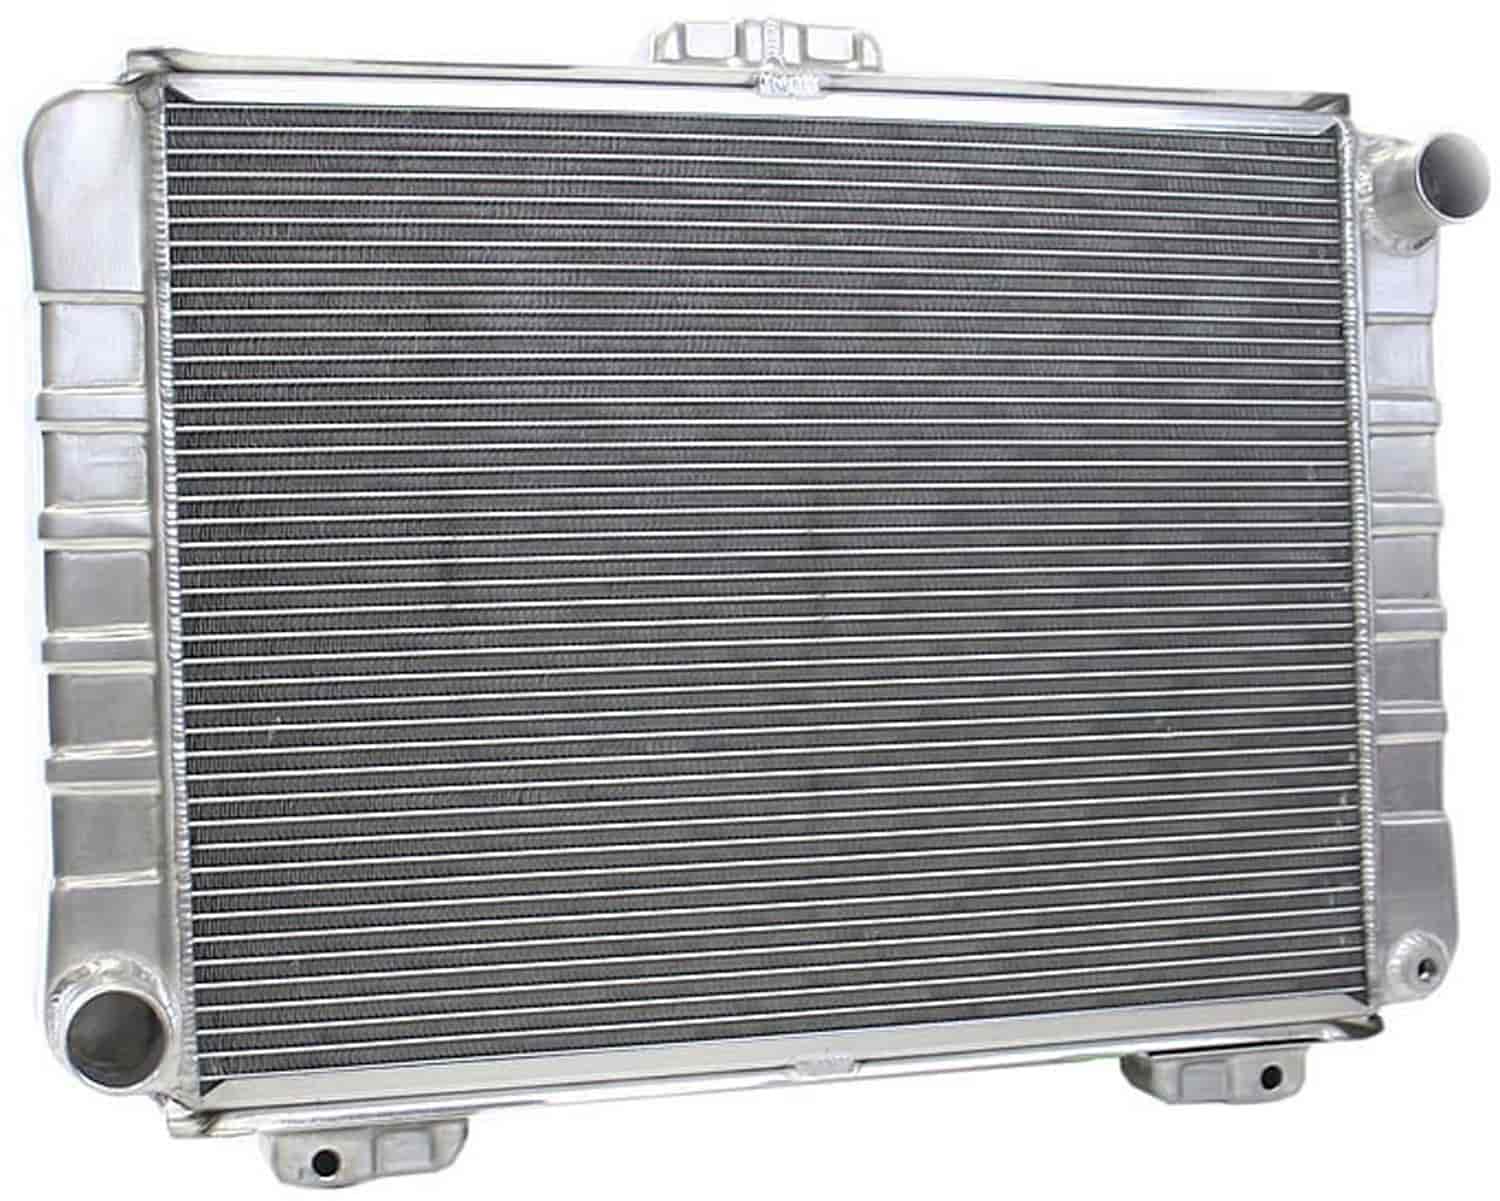 ExactFit Radiator for 1964 Galaxie/Thunderbolt with Late Small